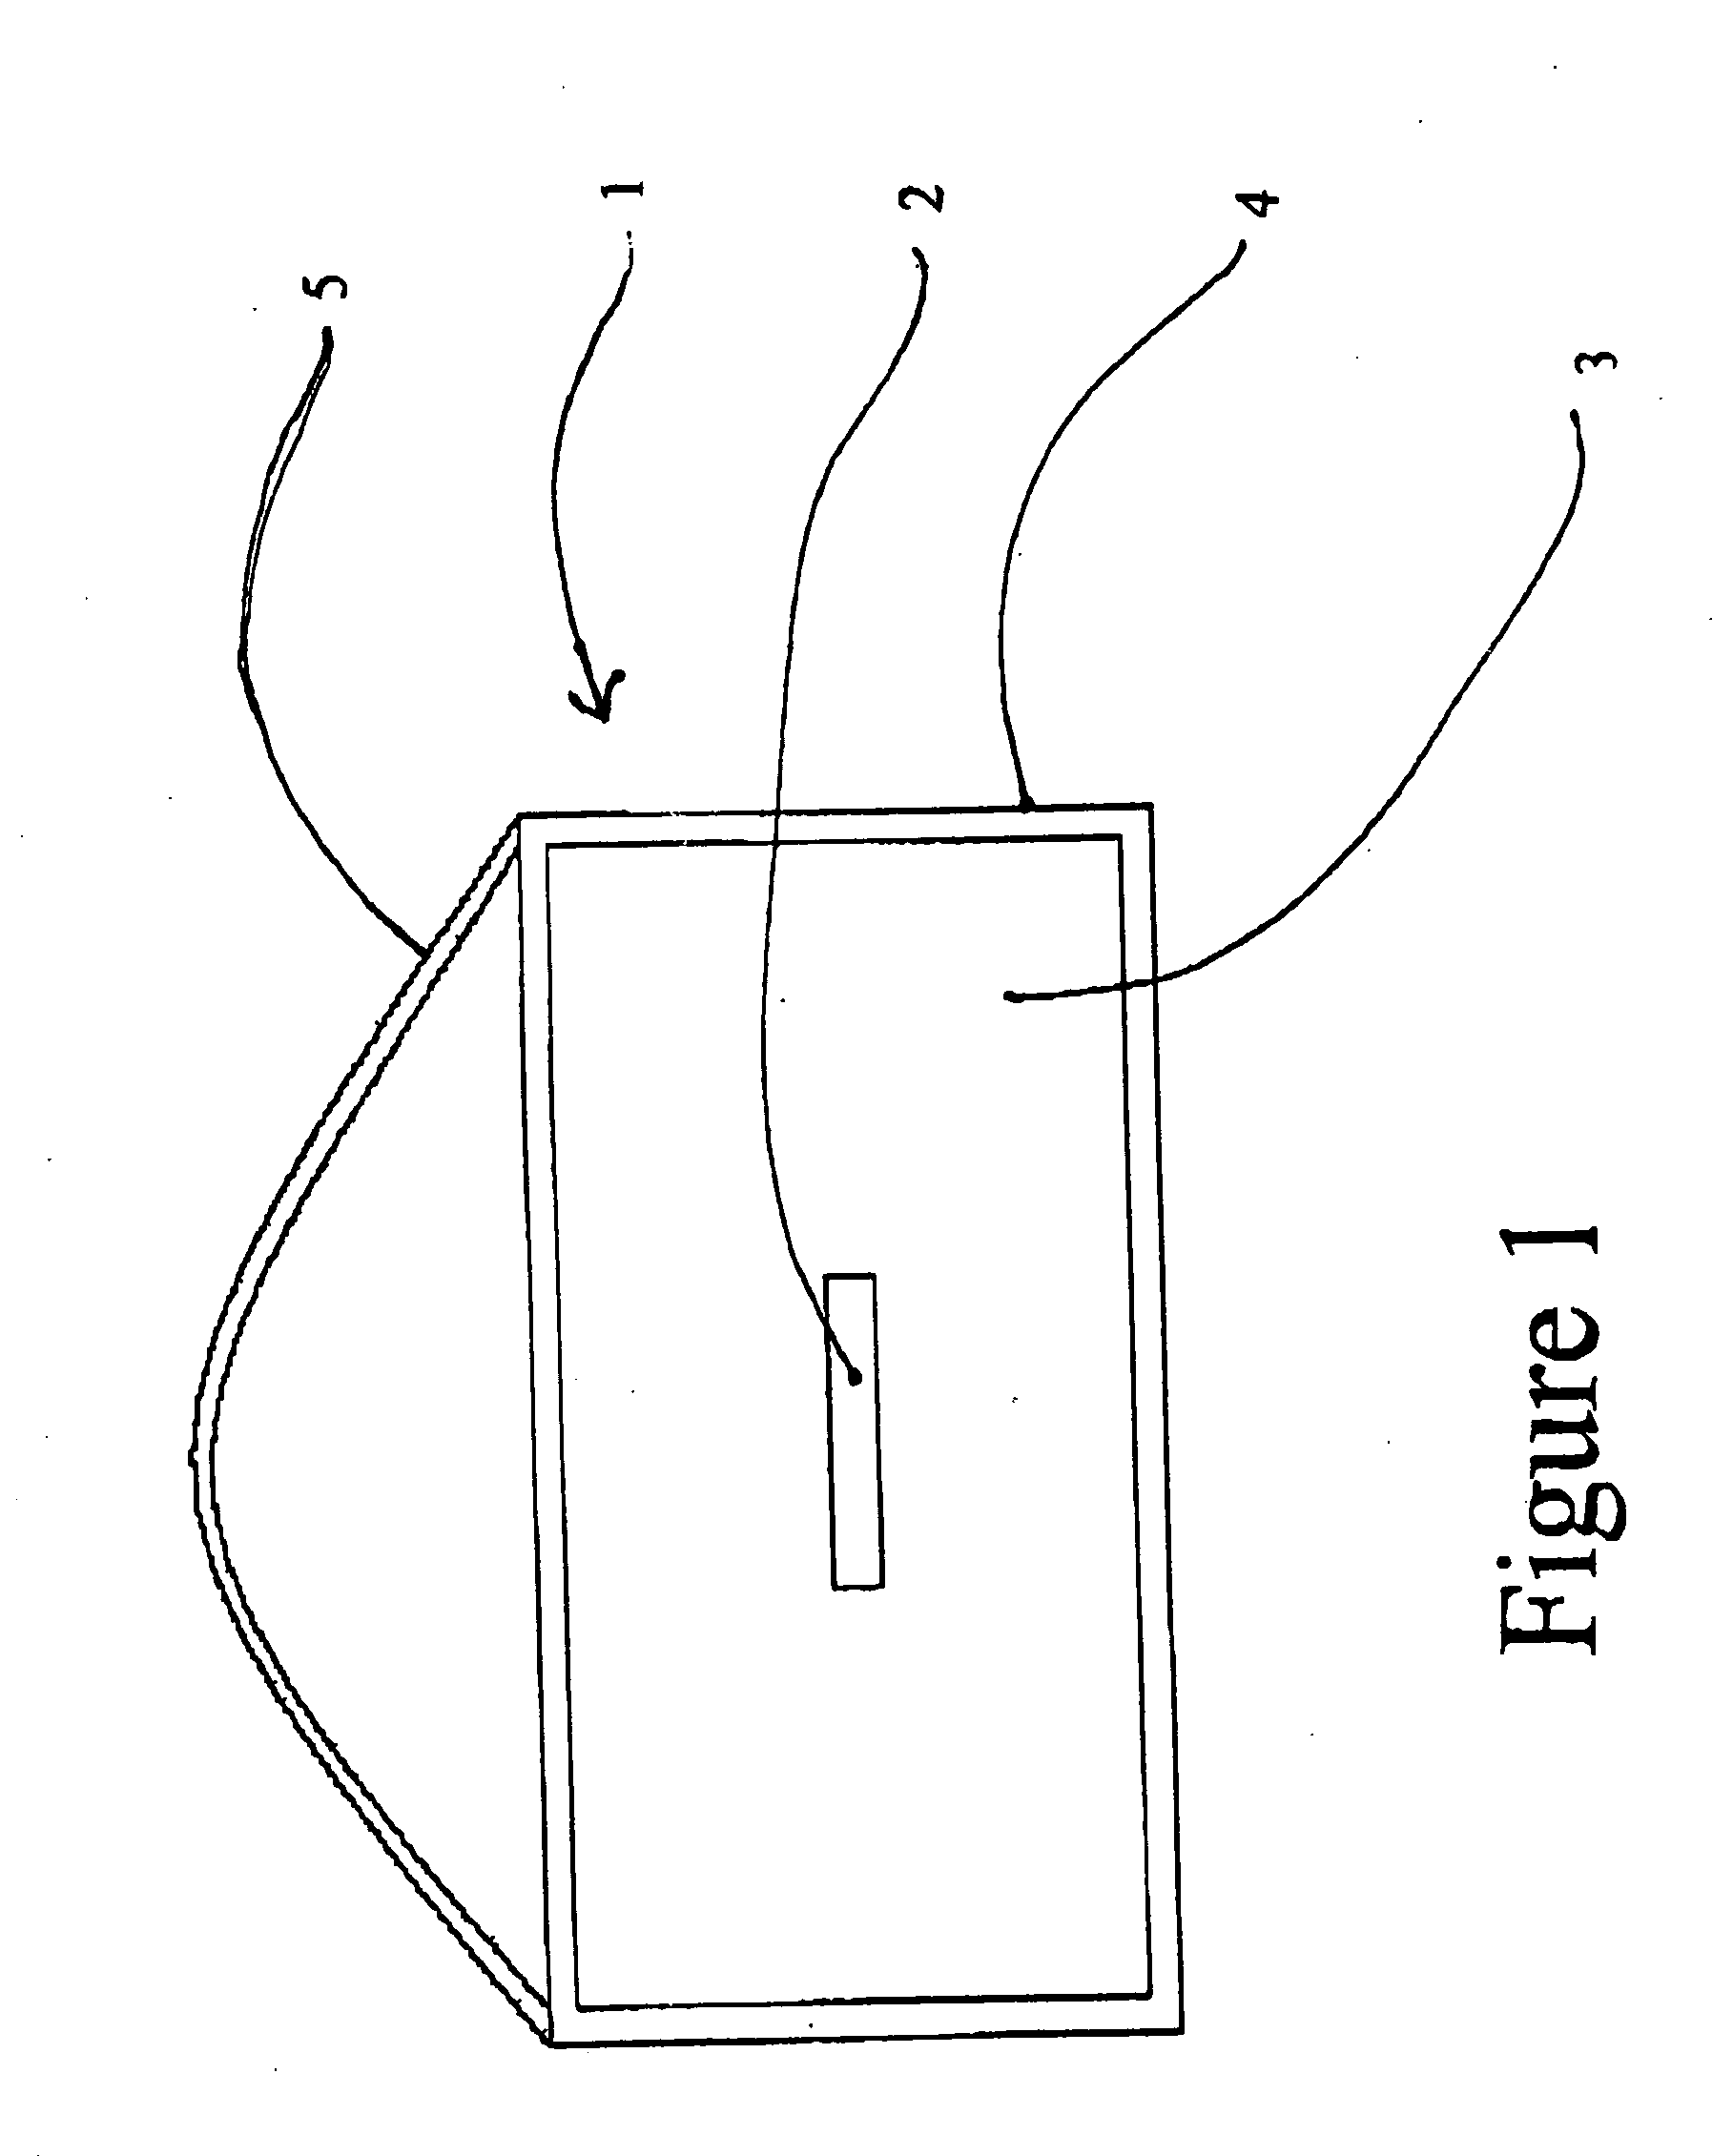 Method and apparatus to indicate combustor performance for processing chemical/biological contaminated waste